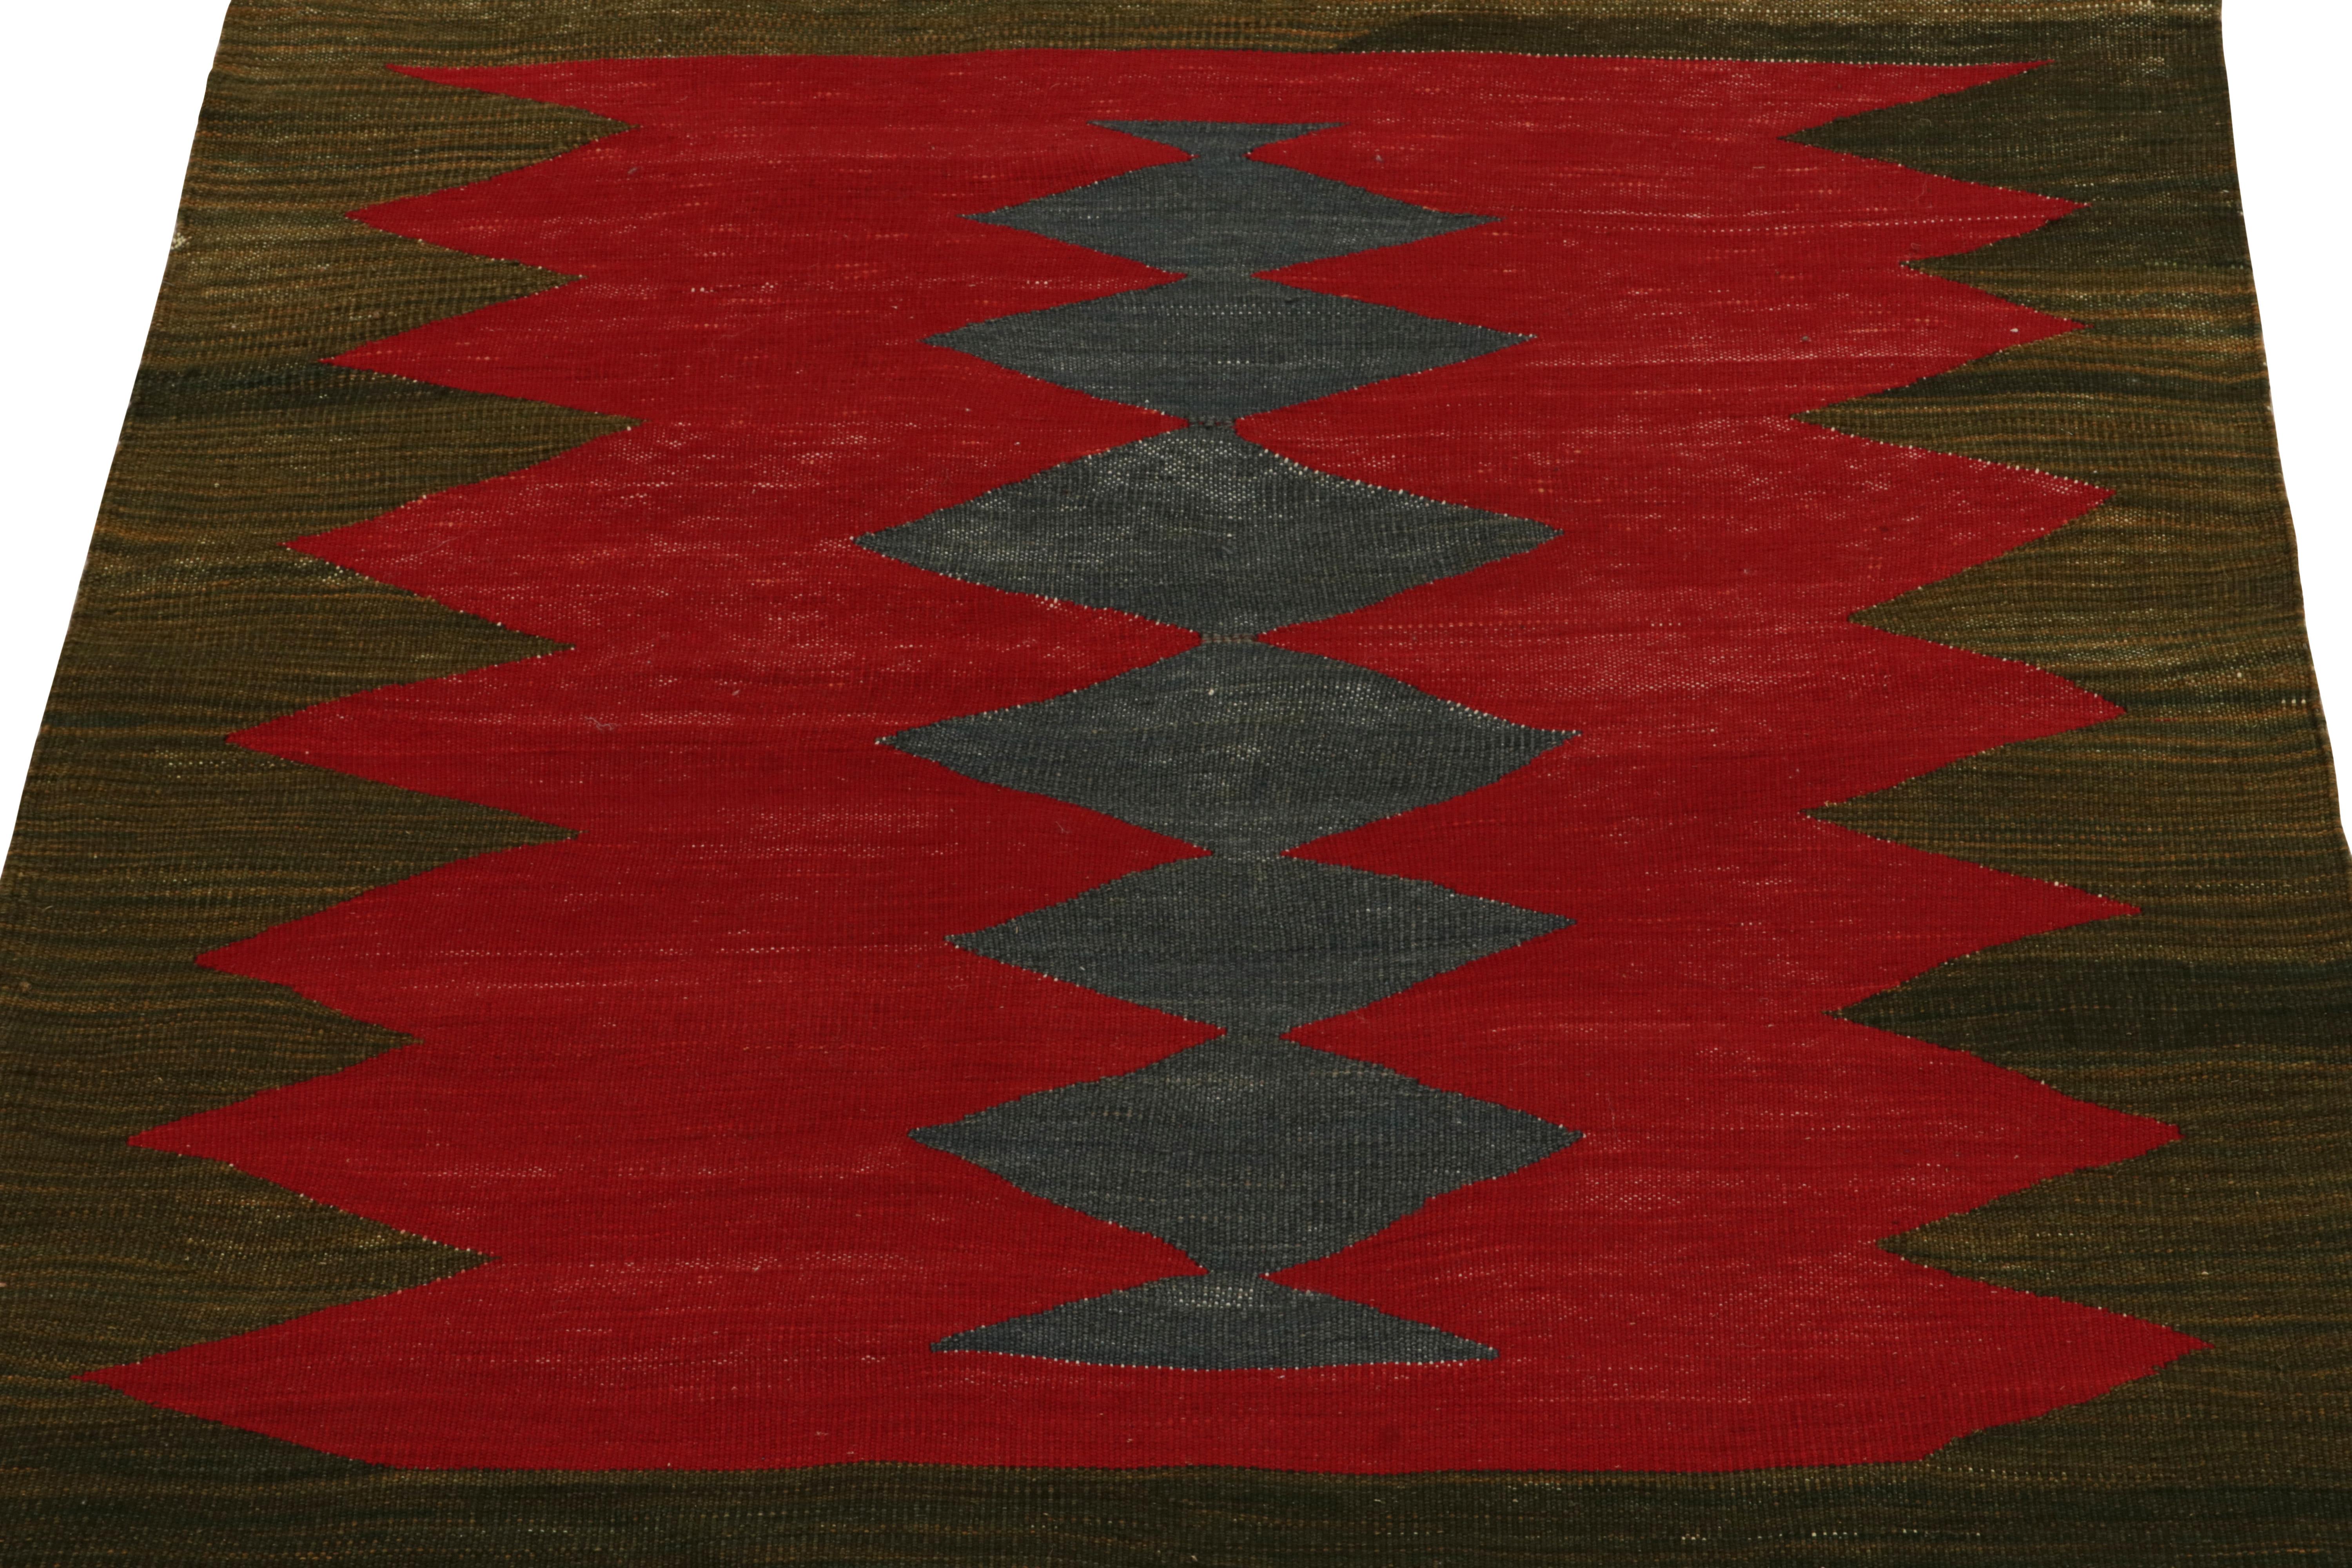 Handwoven in wool circa 1980-1990, from a rare vintage curation of small-sized Sofreh Kilim rugs in our classic collection. Especially distinguished for its 3x3 size and durability among Persian flat weaves of its time. 

The piece carries an